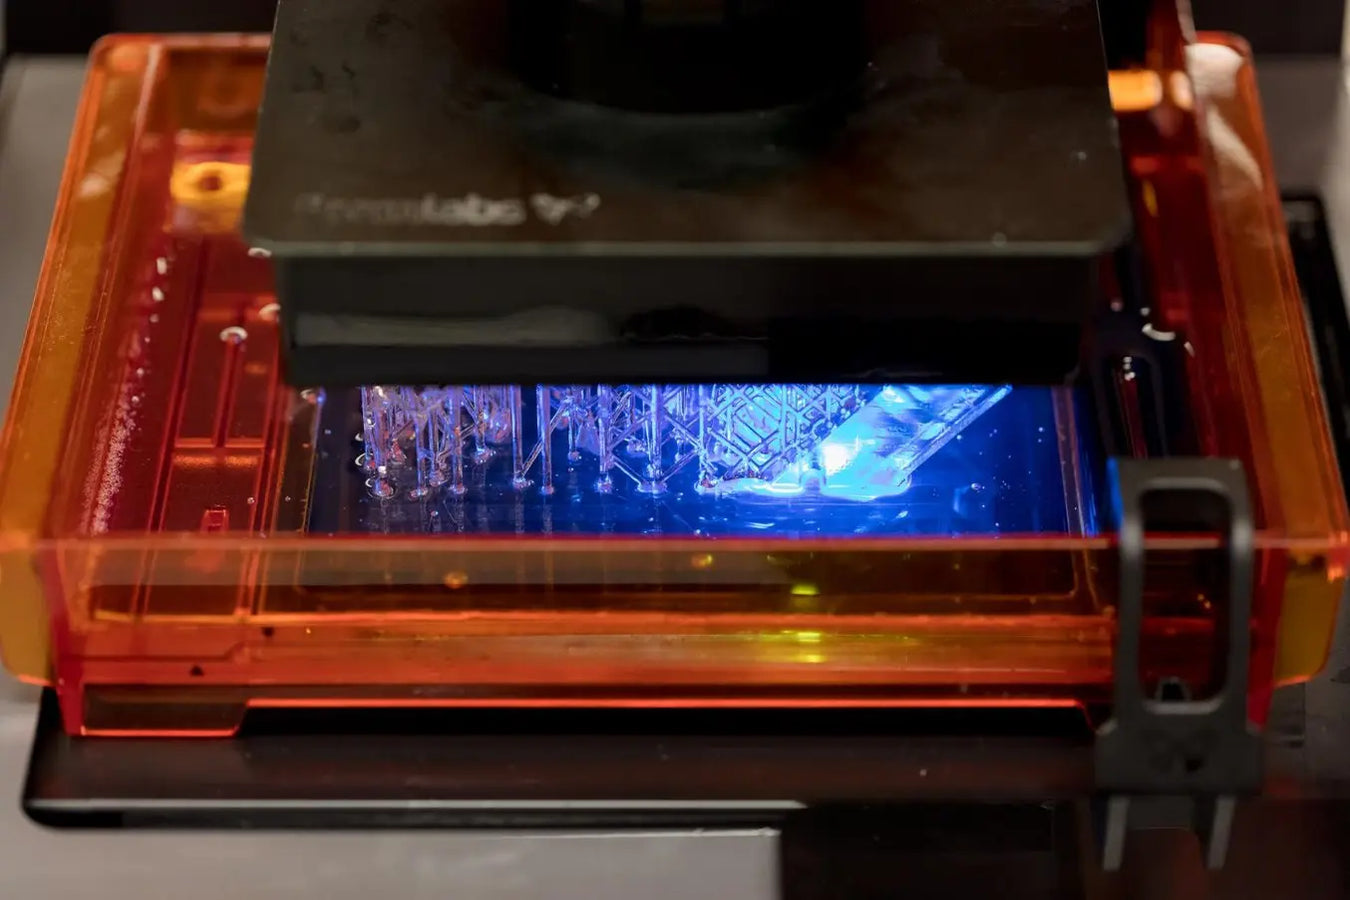 Stereolithography (SLA)